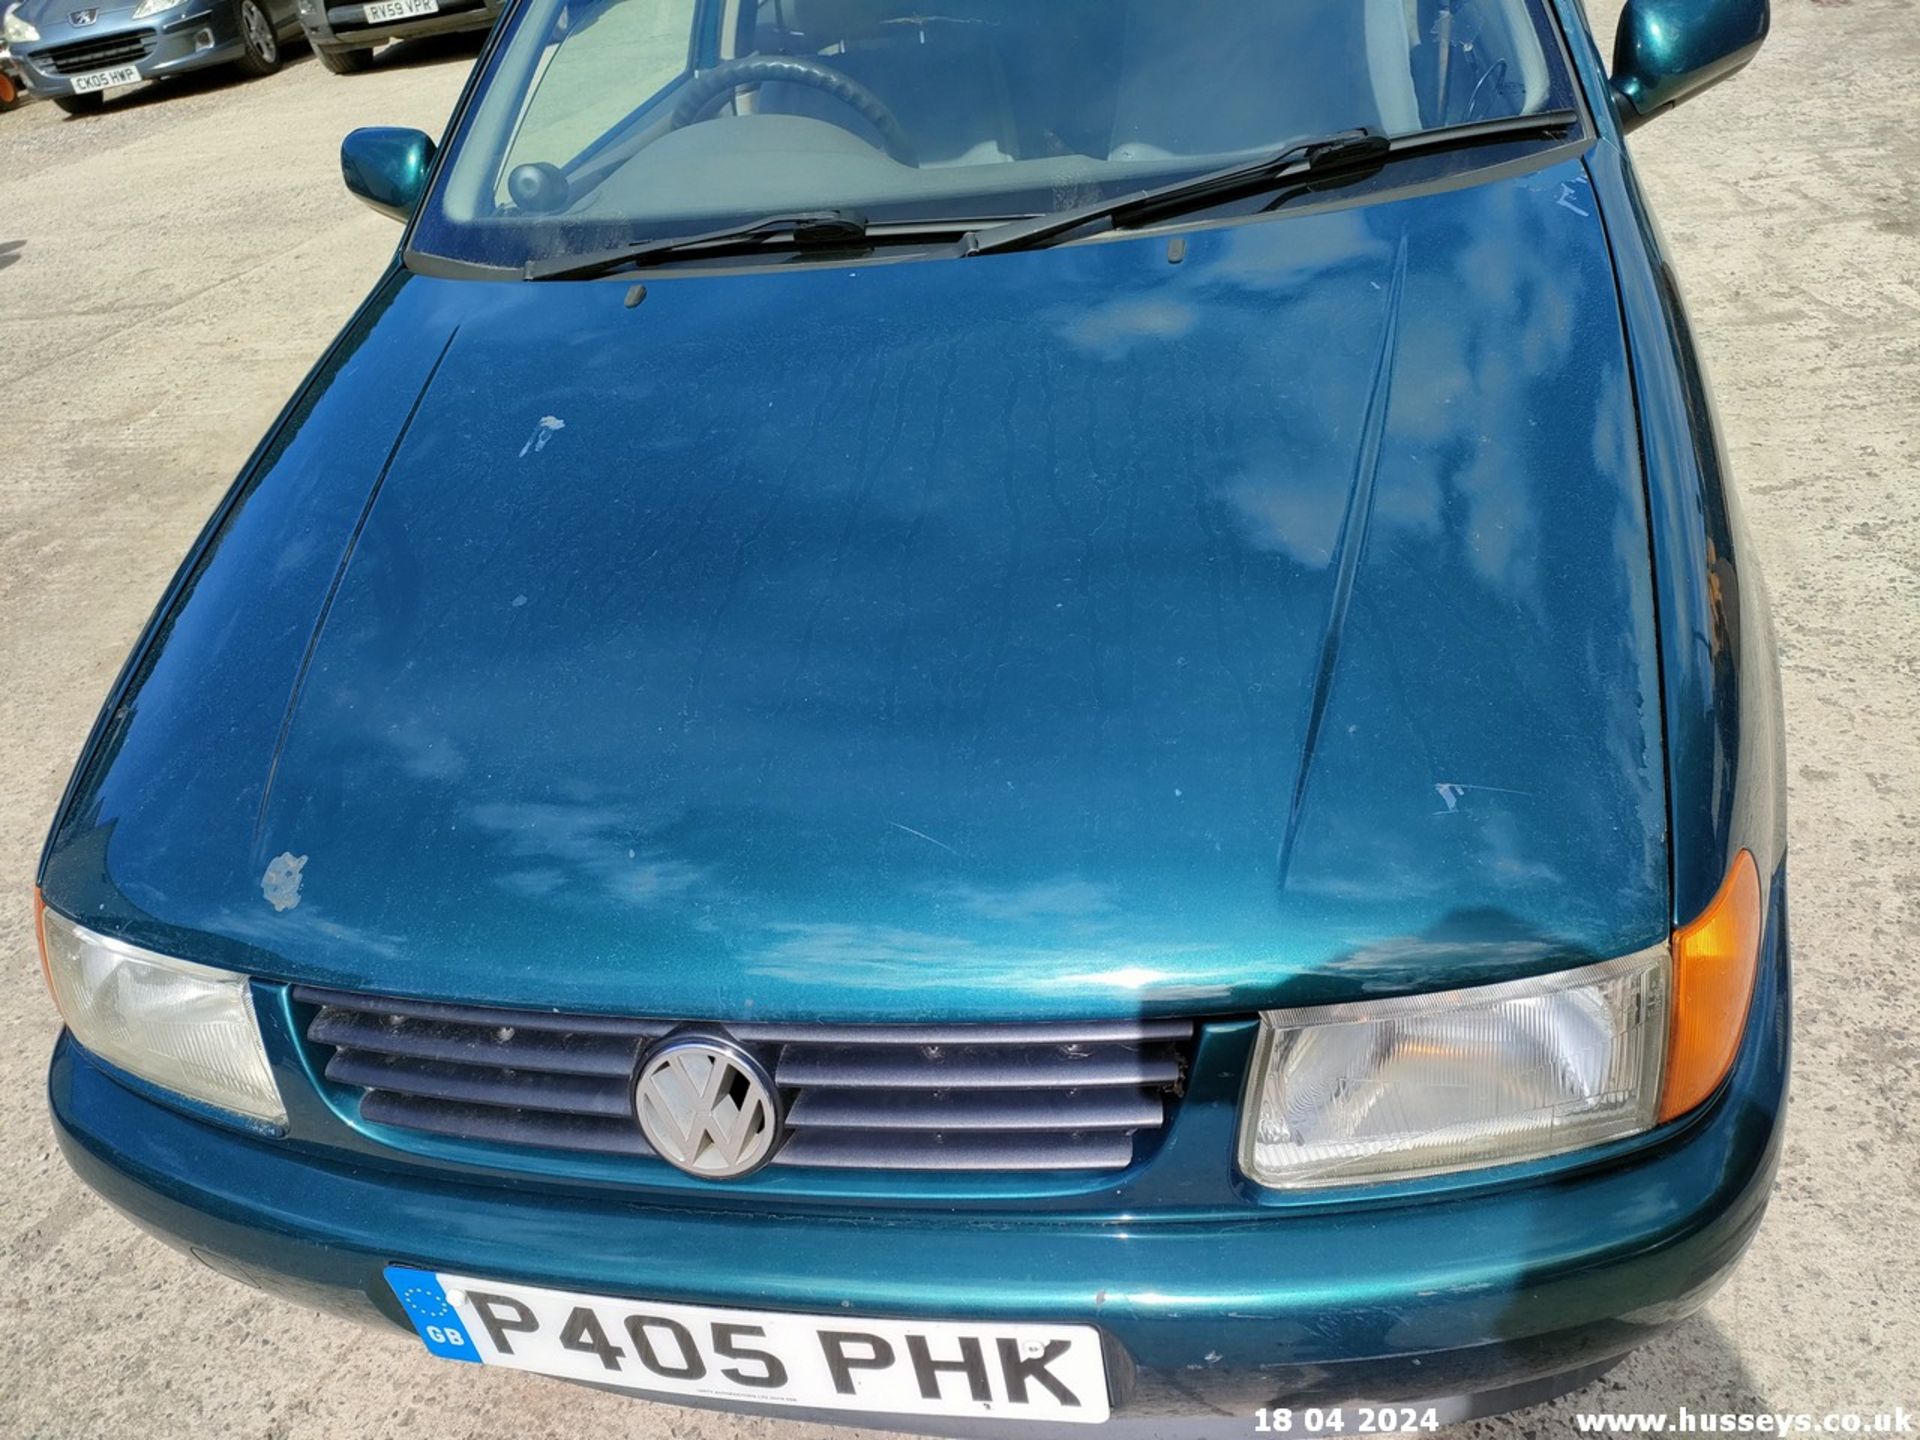 1997 VOLKSWAGEN POLO 1.4 CL AUTO - 1390cc 3dr Hatchback (Green, 68k) - Image 11 of 60